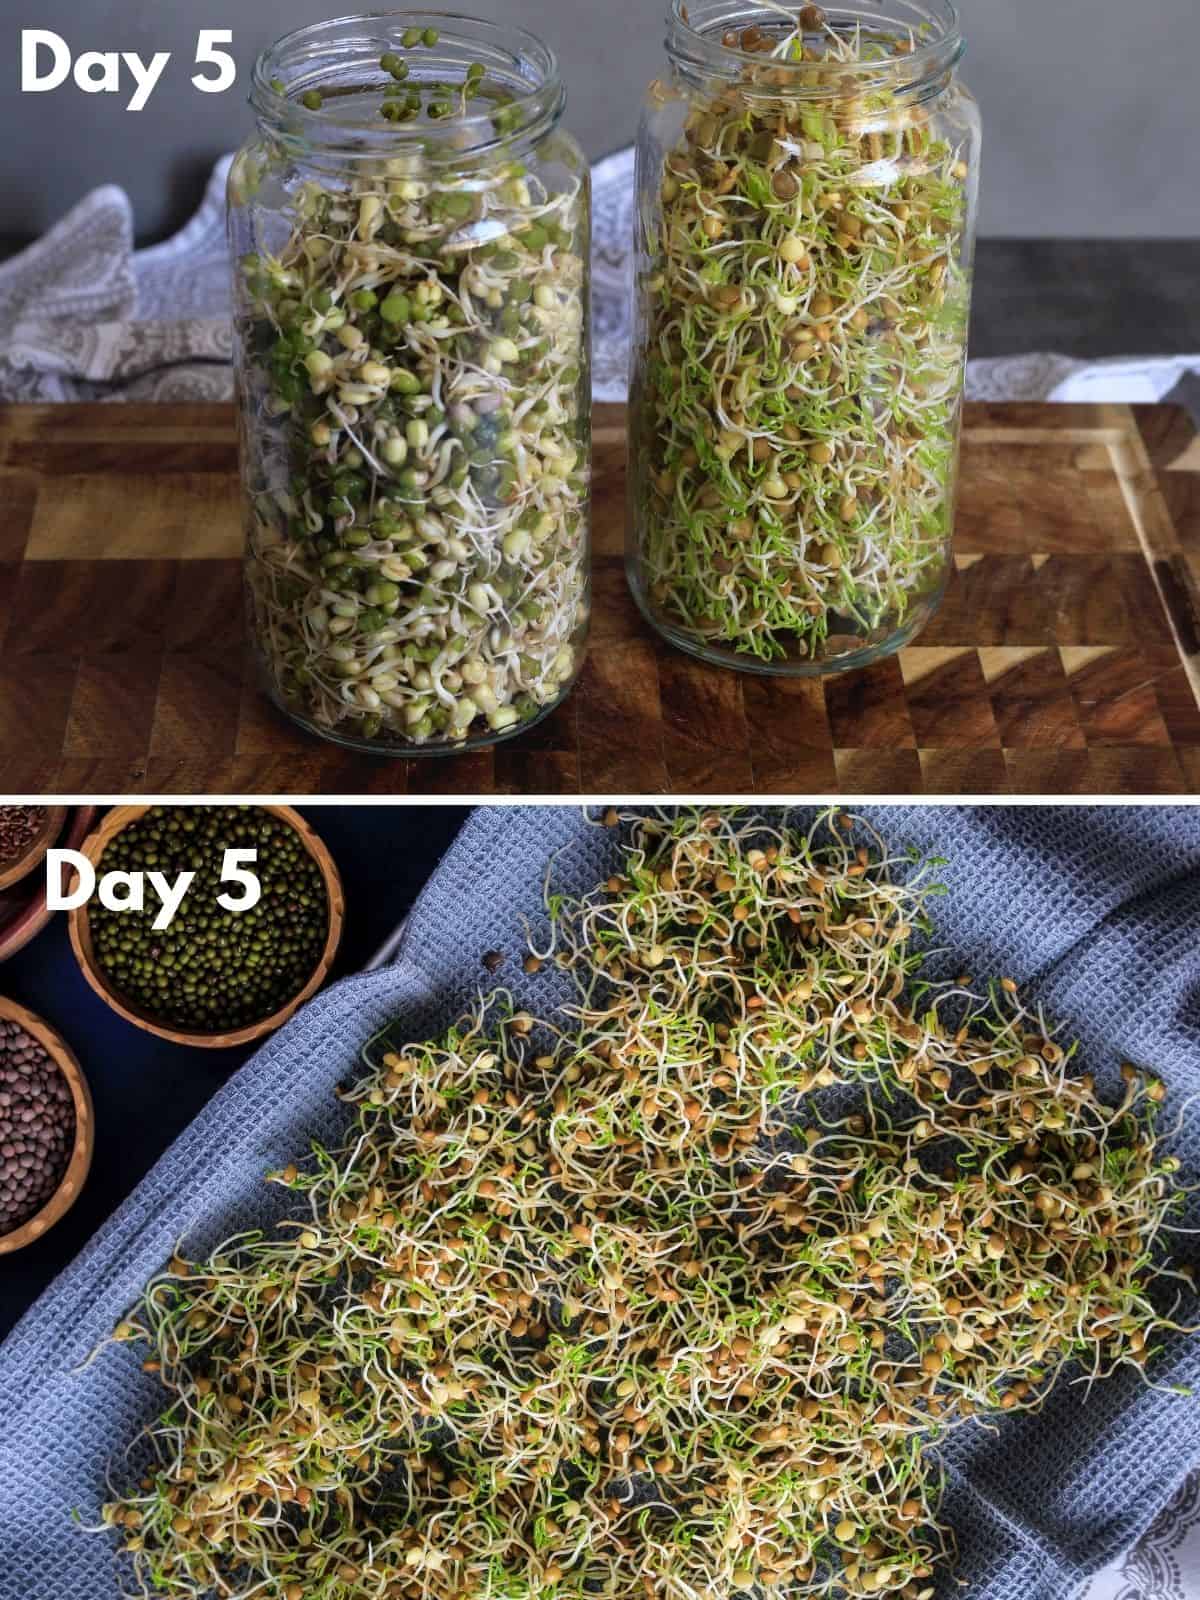 Sprouts on day 5 in jar and on tray